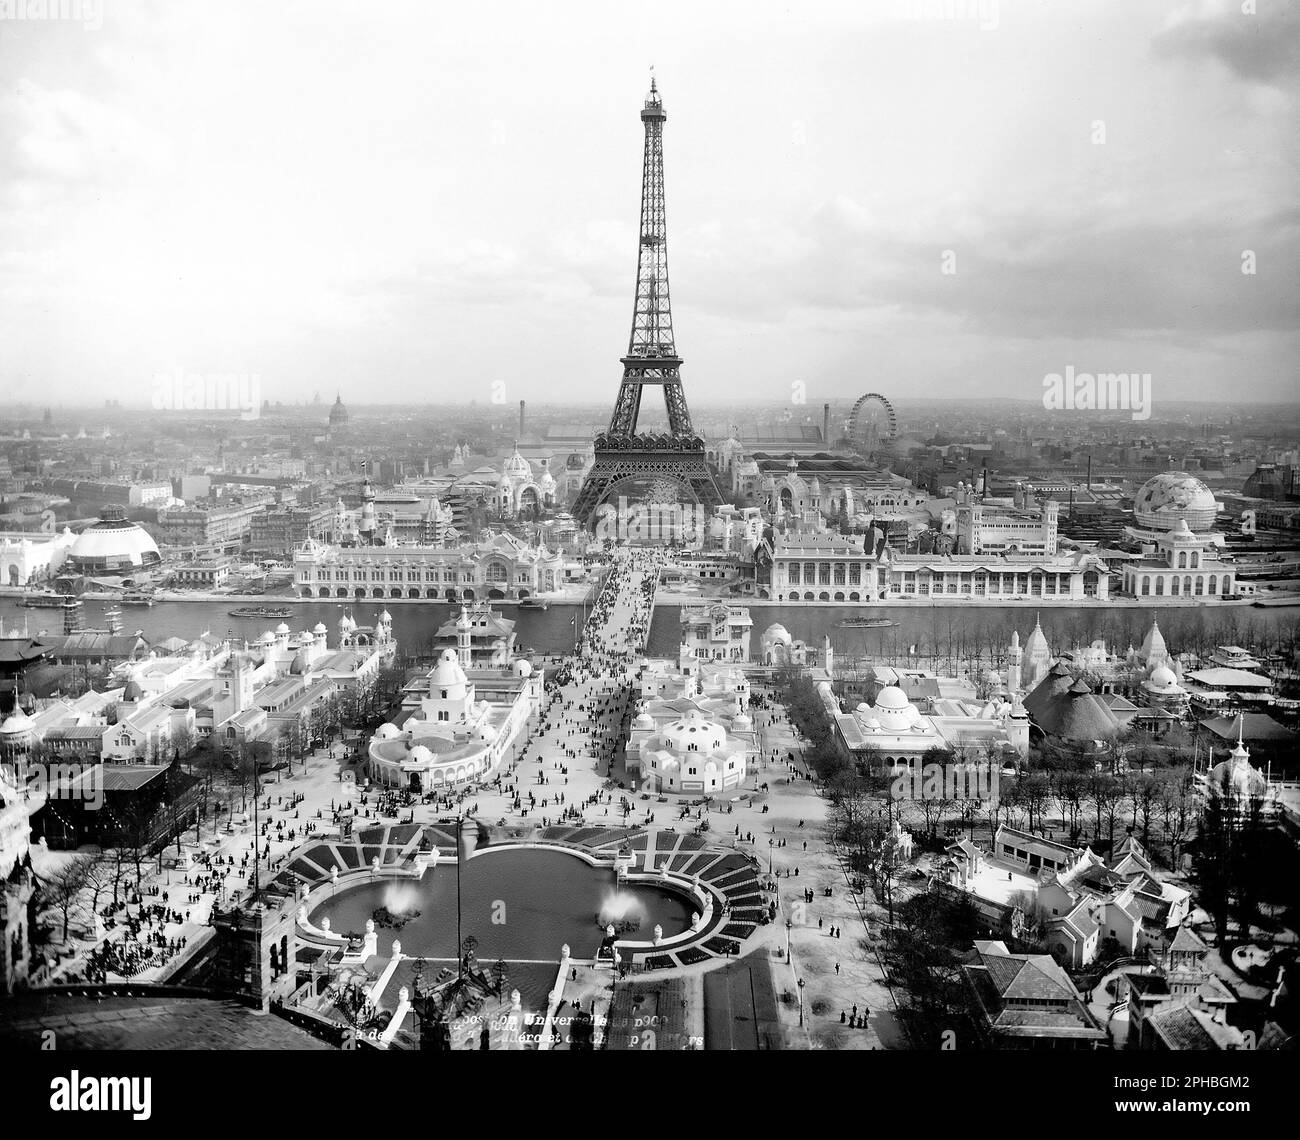 Eiffel Tower, Trocadero and the Champs de Mars, Exposition Universelle 1900, Paris, France. The Eiffel Tower was built to serve as the entrance to the Exposition Universelle in 1889. Stock Photo